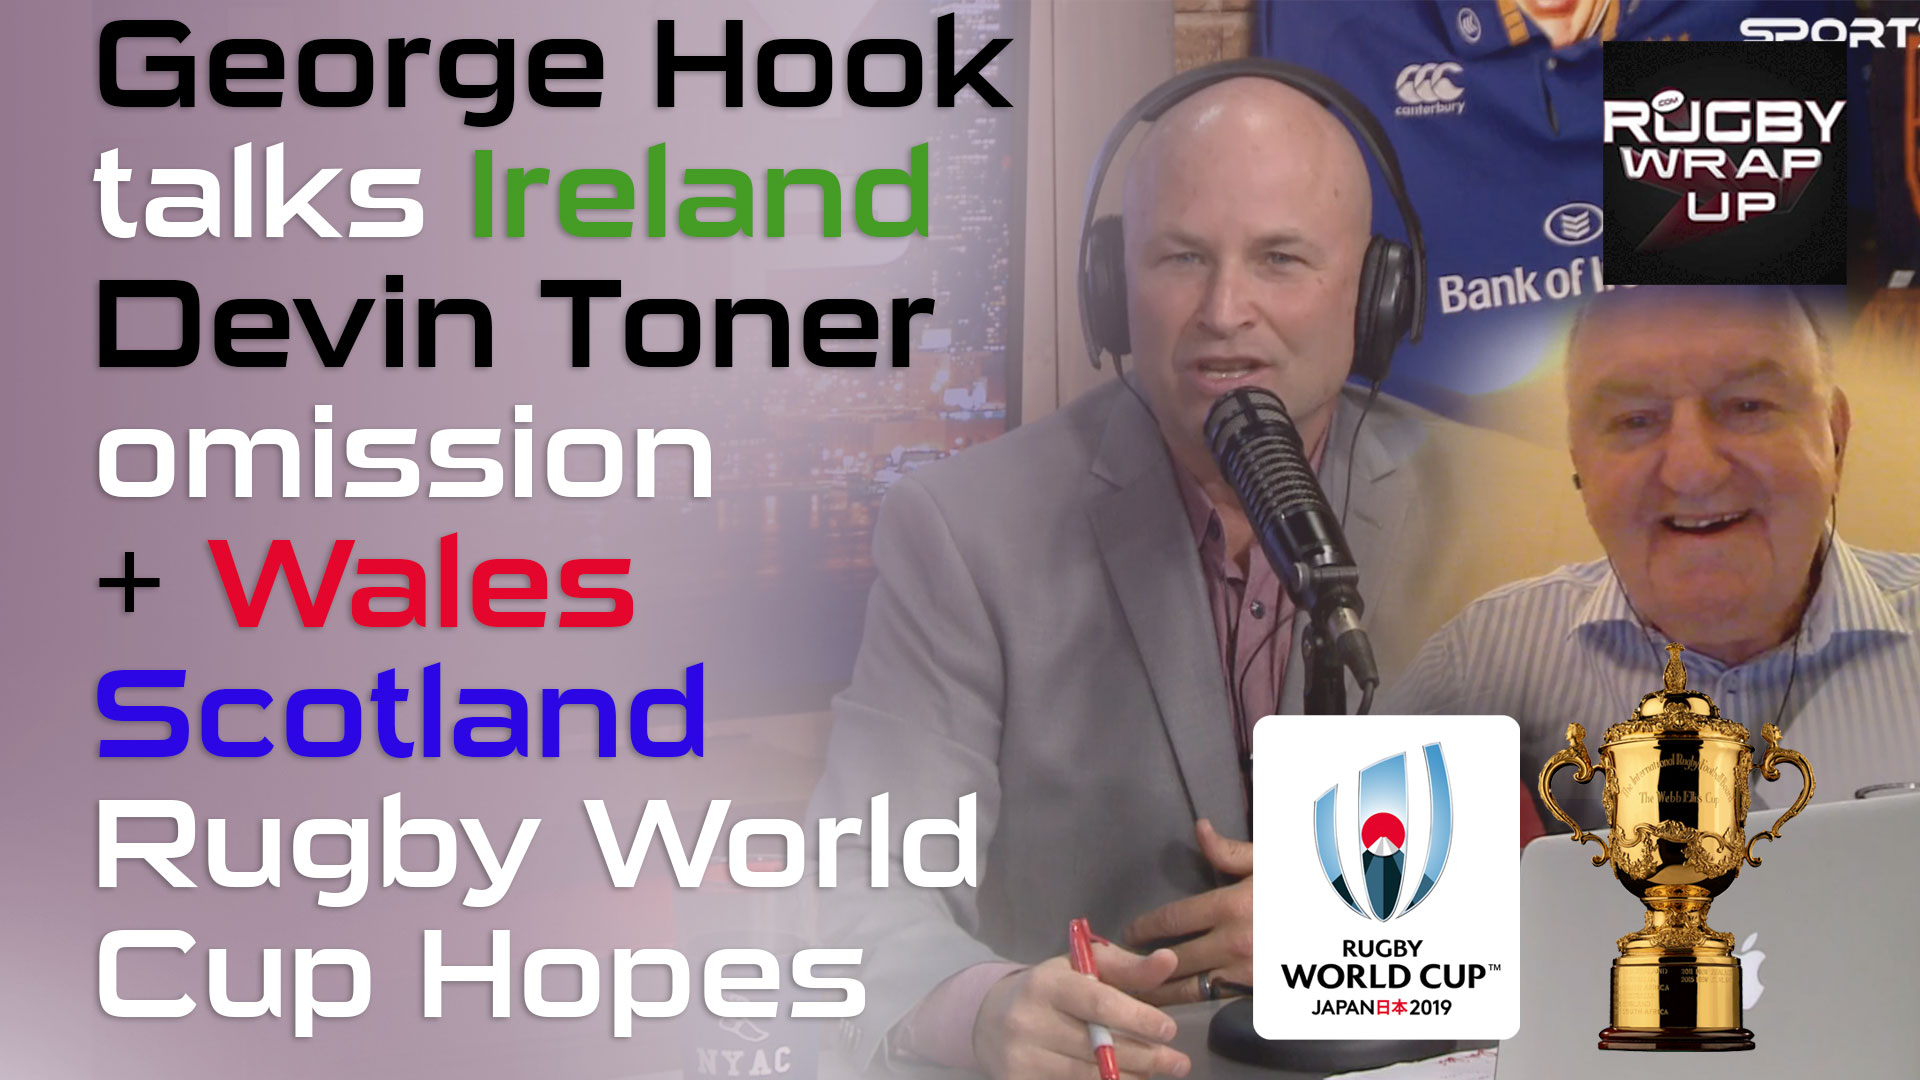 Rugby TV/Podcast: RWC Controversy! Pichot/Toner Crisis! Wales, Scotland & Japan Over-Hyped? Rassie vs Schmidt/Gatland, Rugby_Wrap_Up, Matt_McCarthy, George_Hook